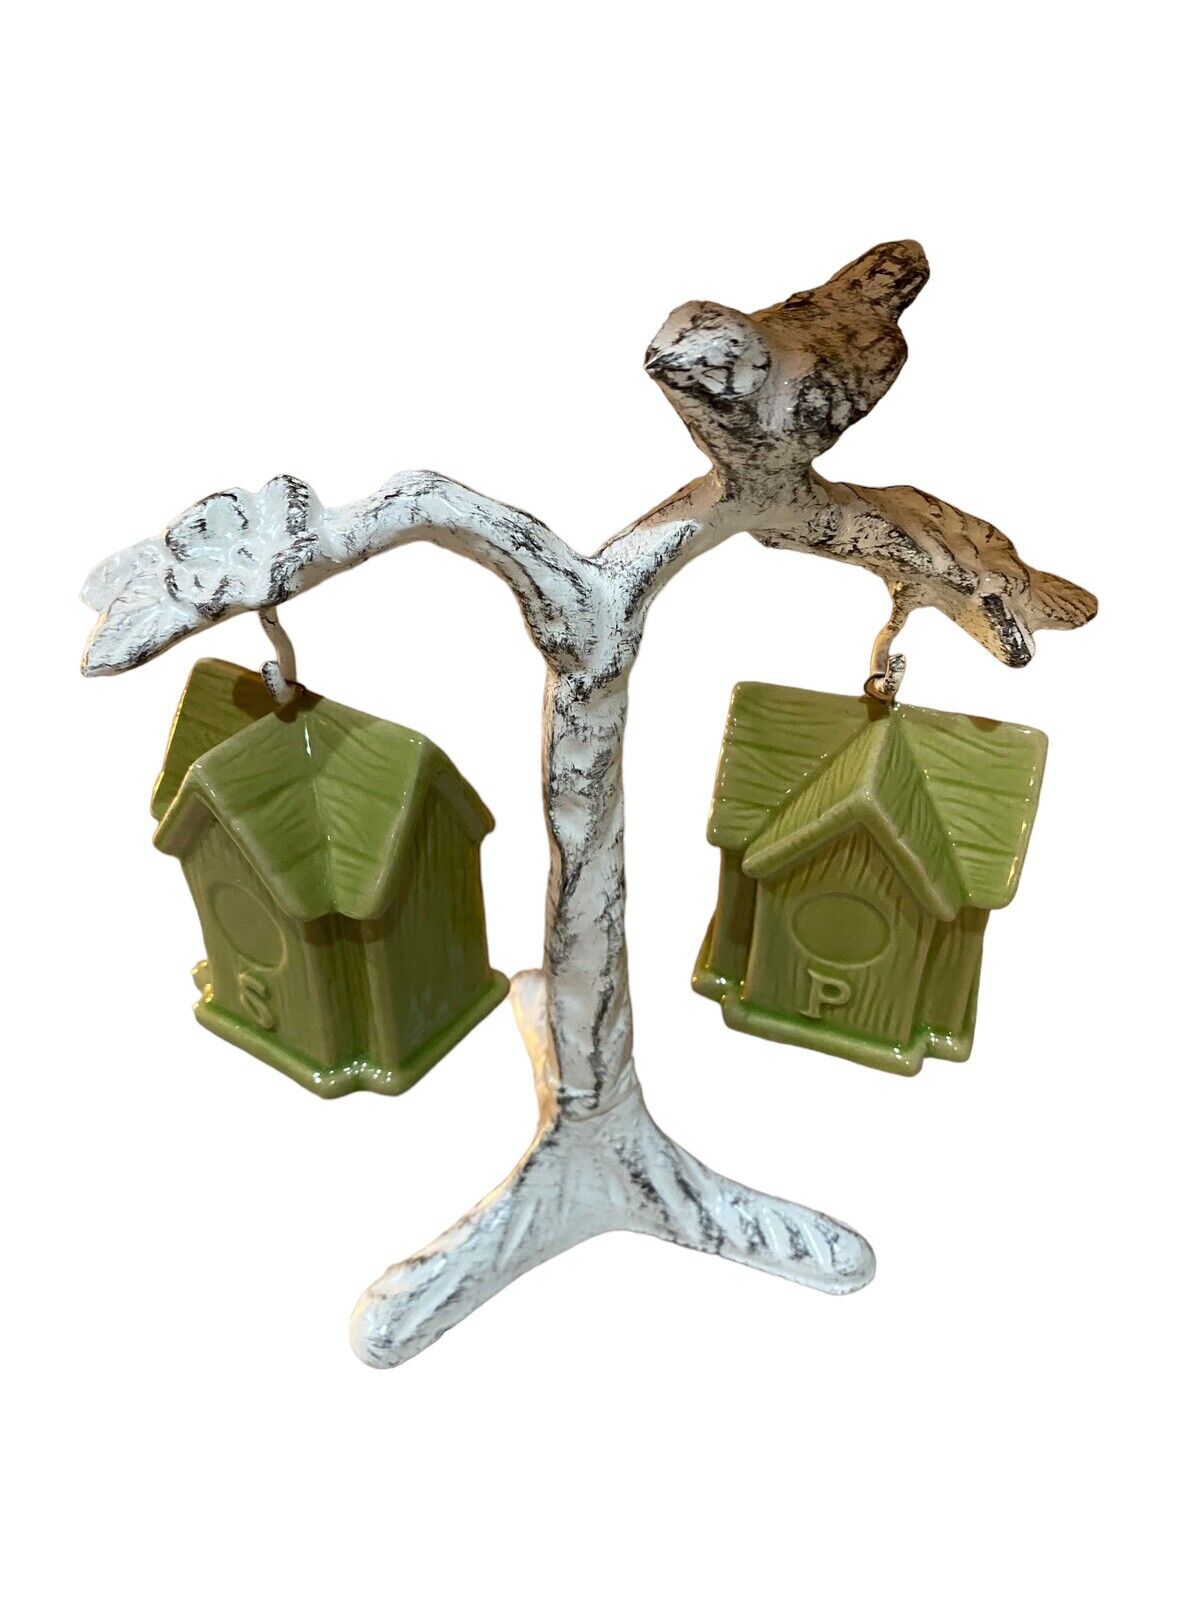 Ceramic Birdhouse Salt and Pepper Shakers on A Metal Branch